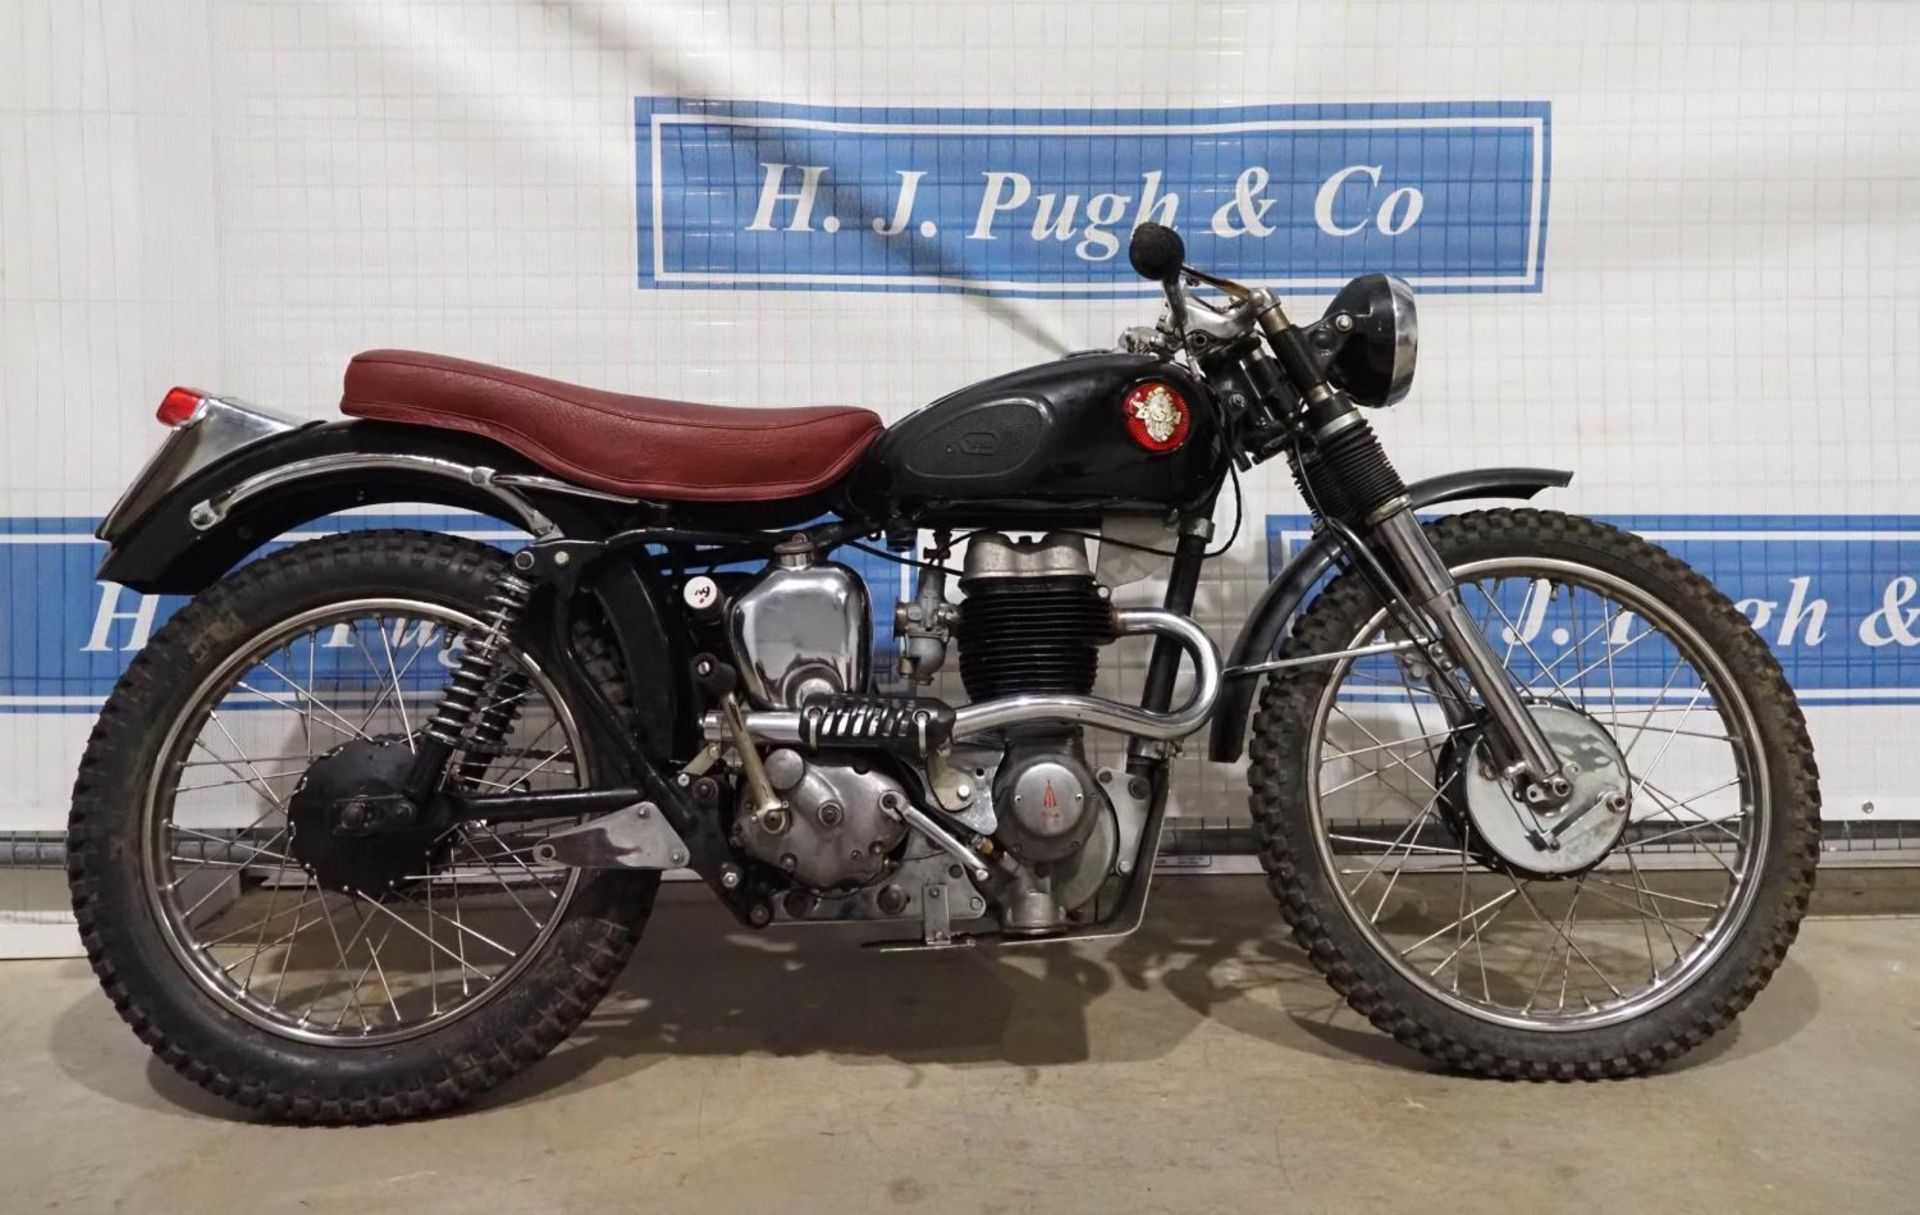 BSA C12 motorcycle. 1956. Fully rebuilt including wheels, needs battery, oils and fuel. No V5 but